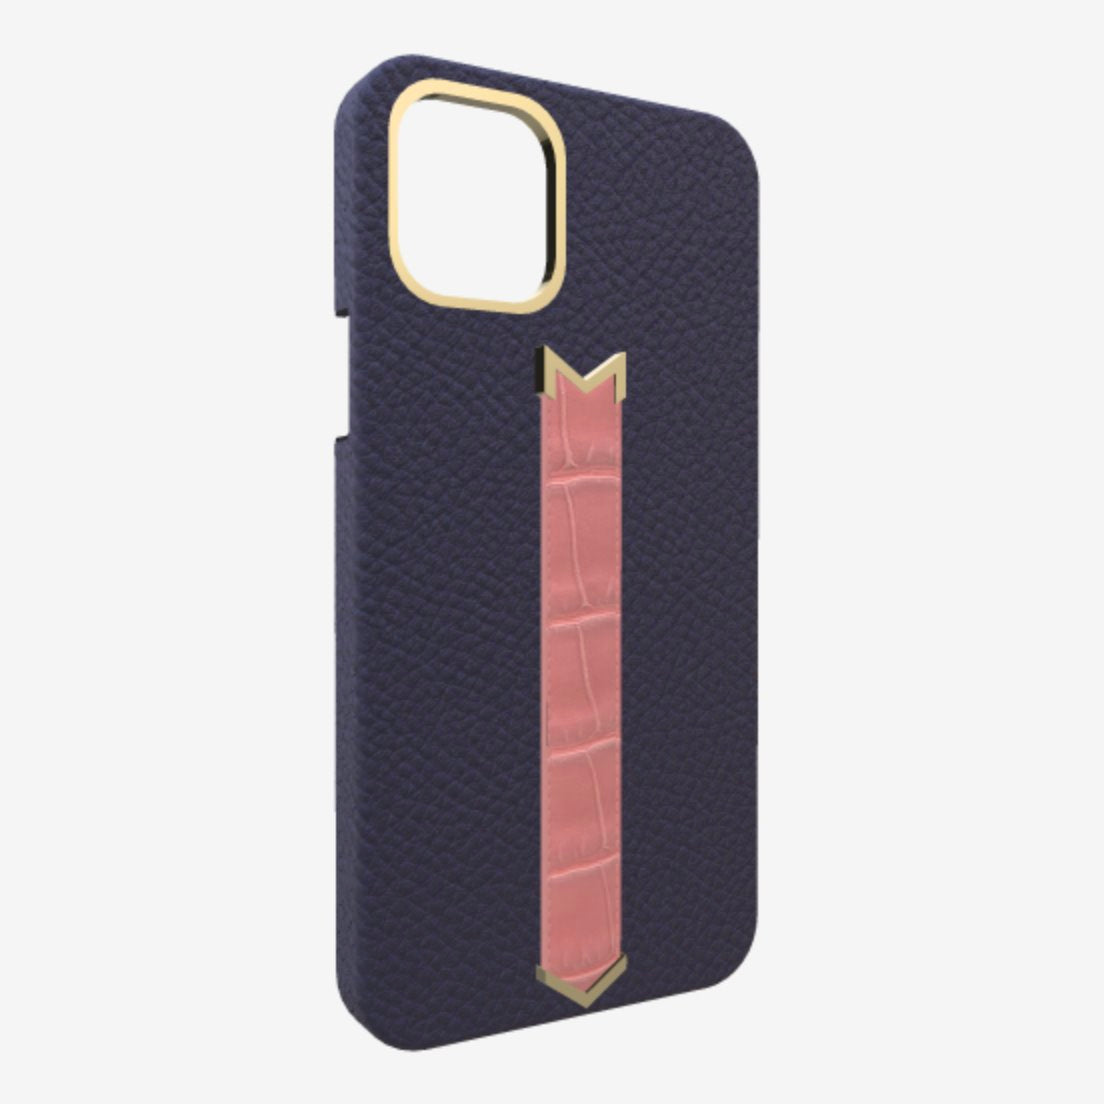 Gold Finger Strap Case for iPhone 13 Pro Max in Genuine Calfskin and Alligator Navy Blue Sweet Rose 